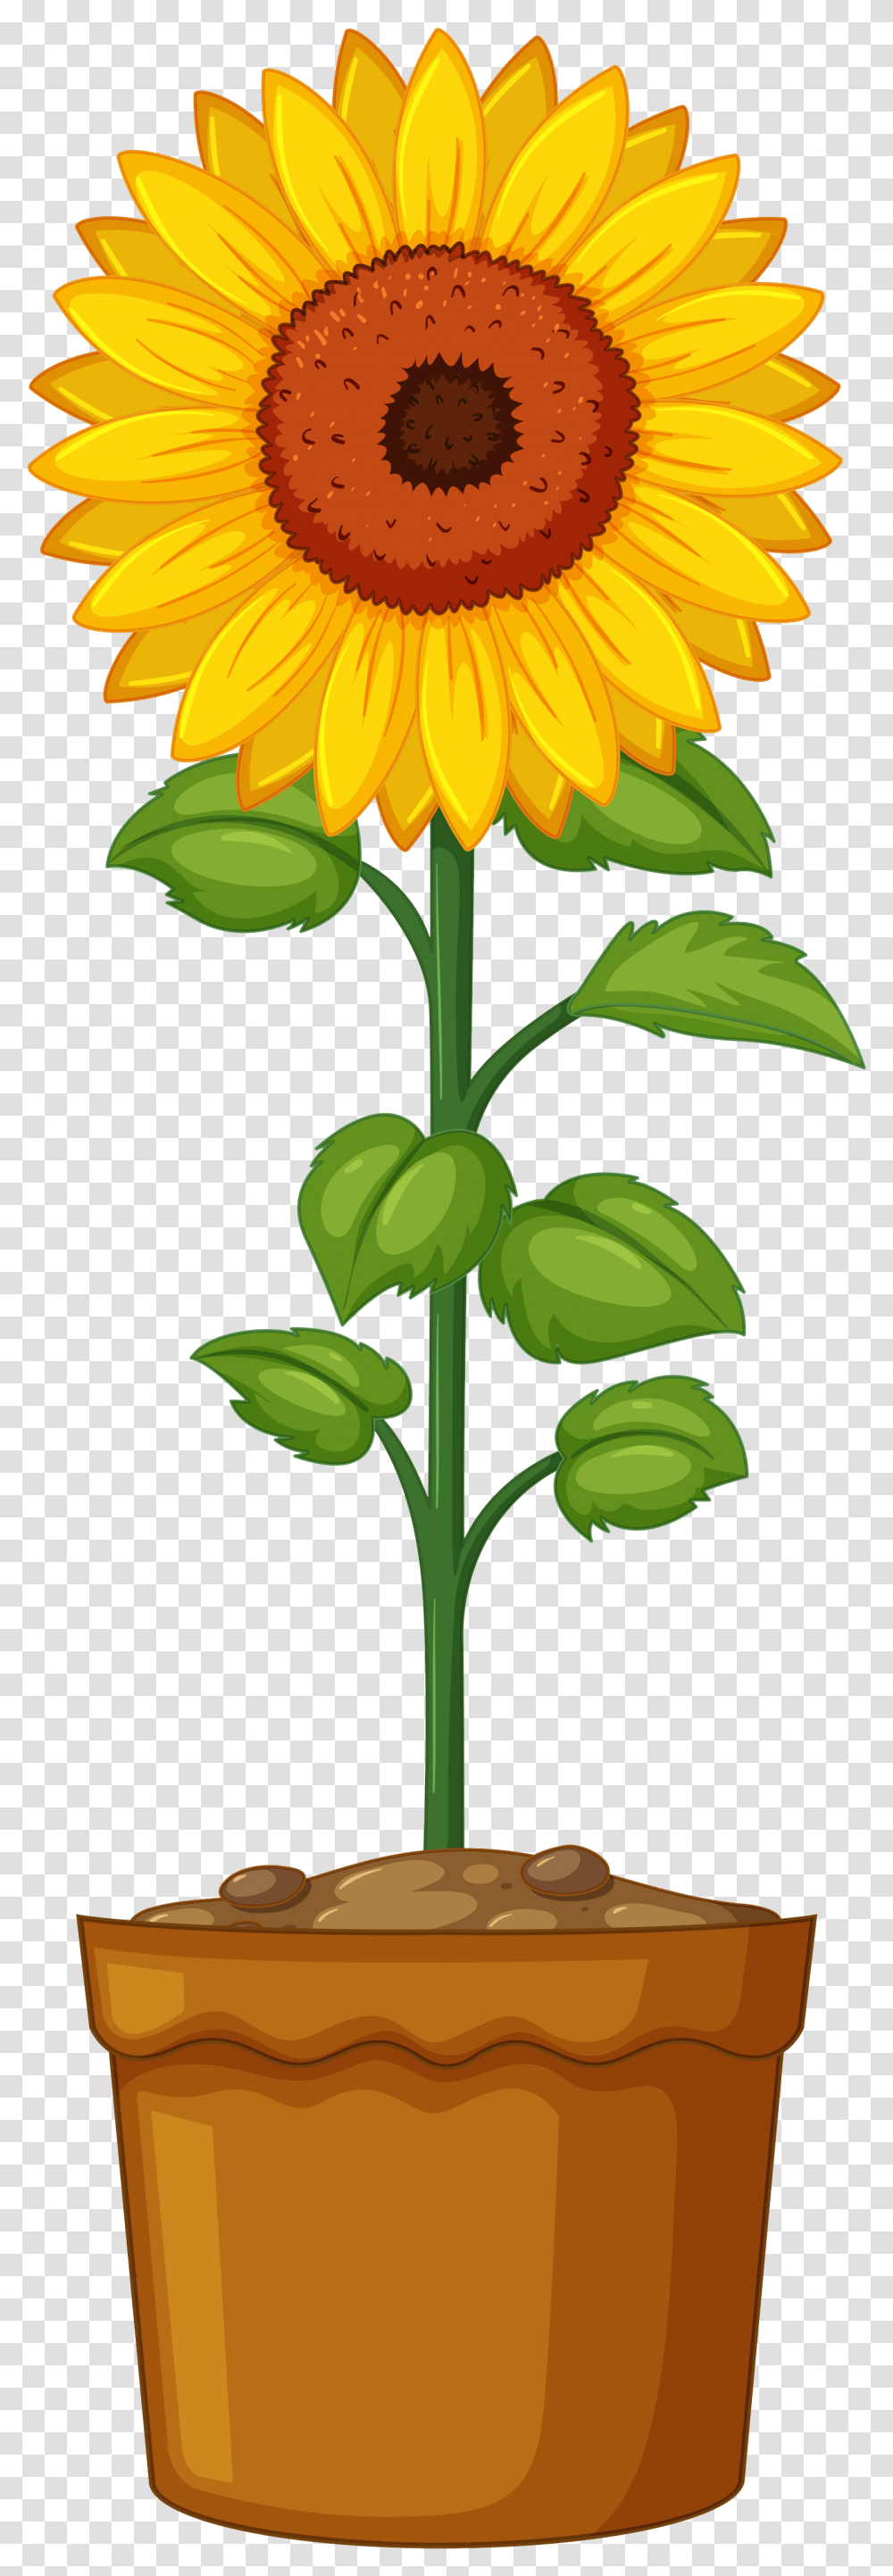 Library Of Planting Flower Picture Royalty Free Stock Sunflower Plant Clip Art, Leaf, Green, Tree, Blossom Transparent Png